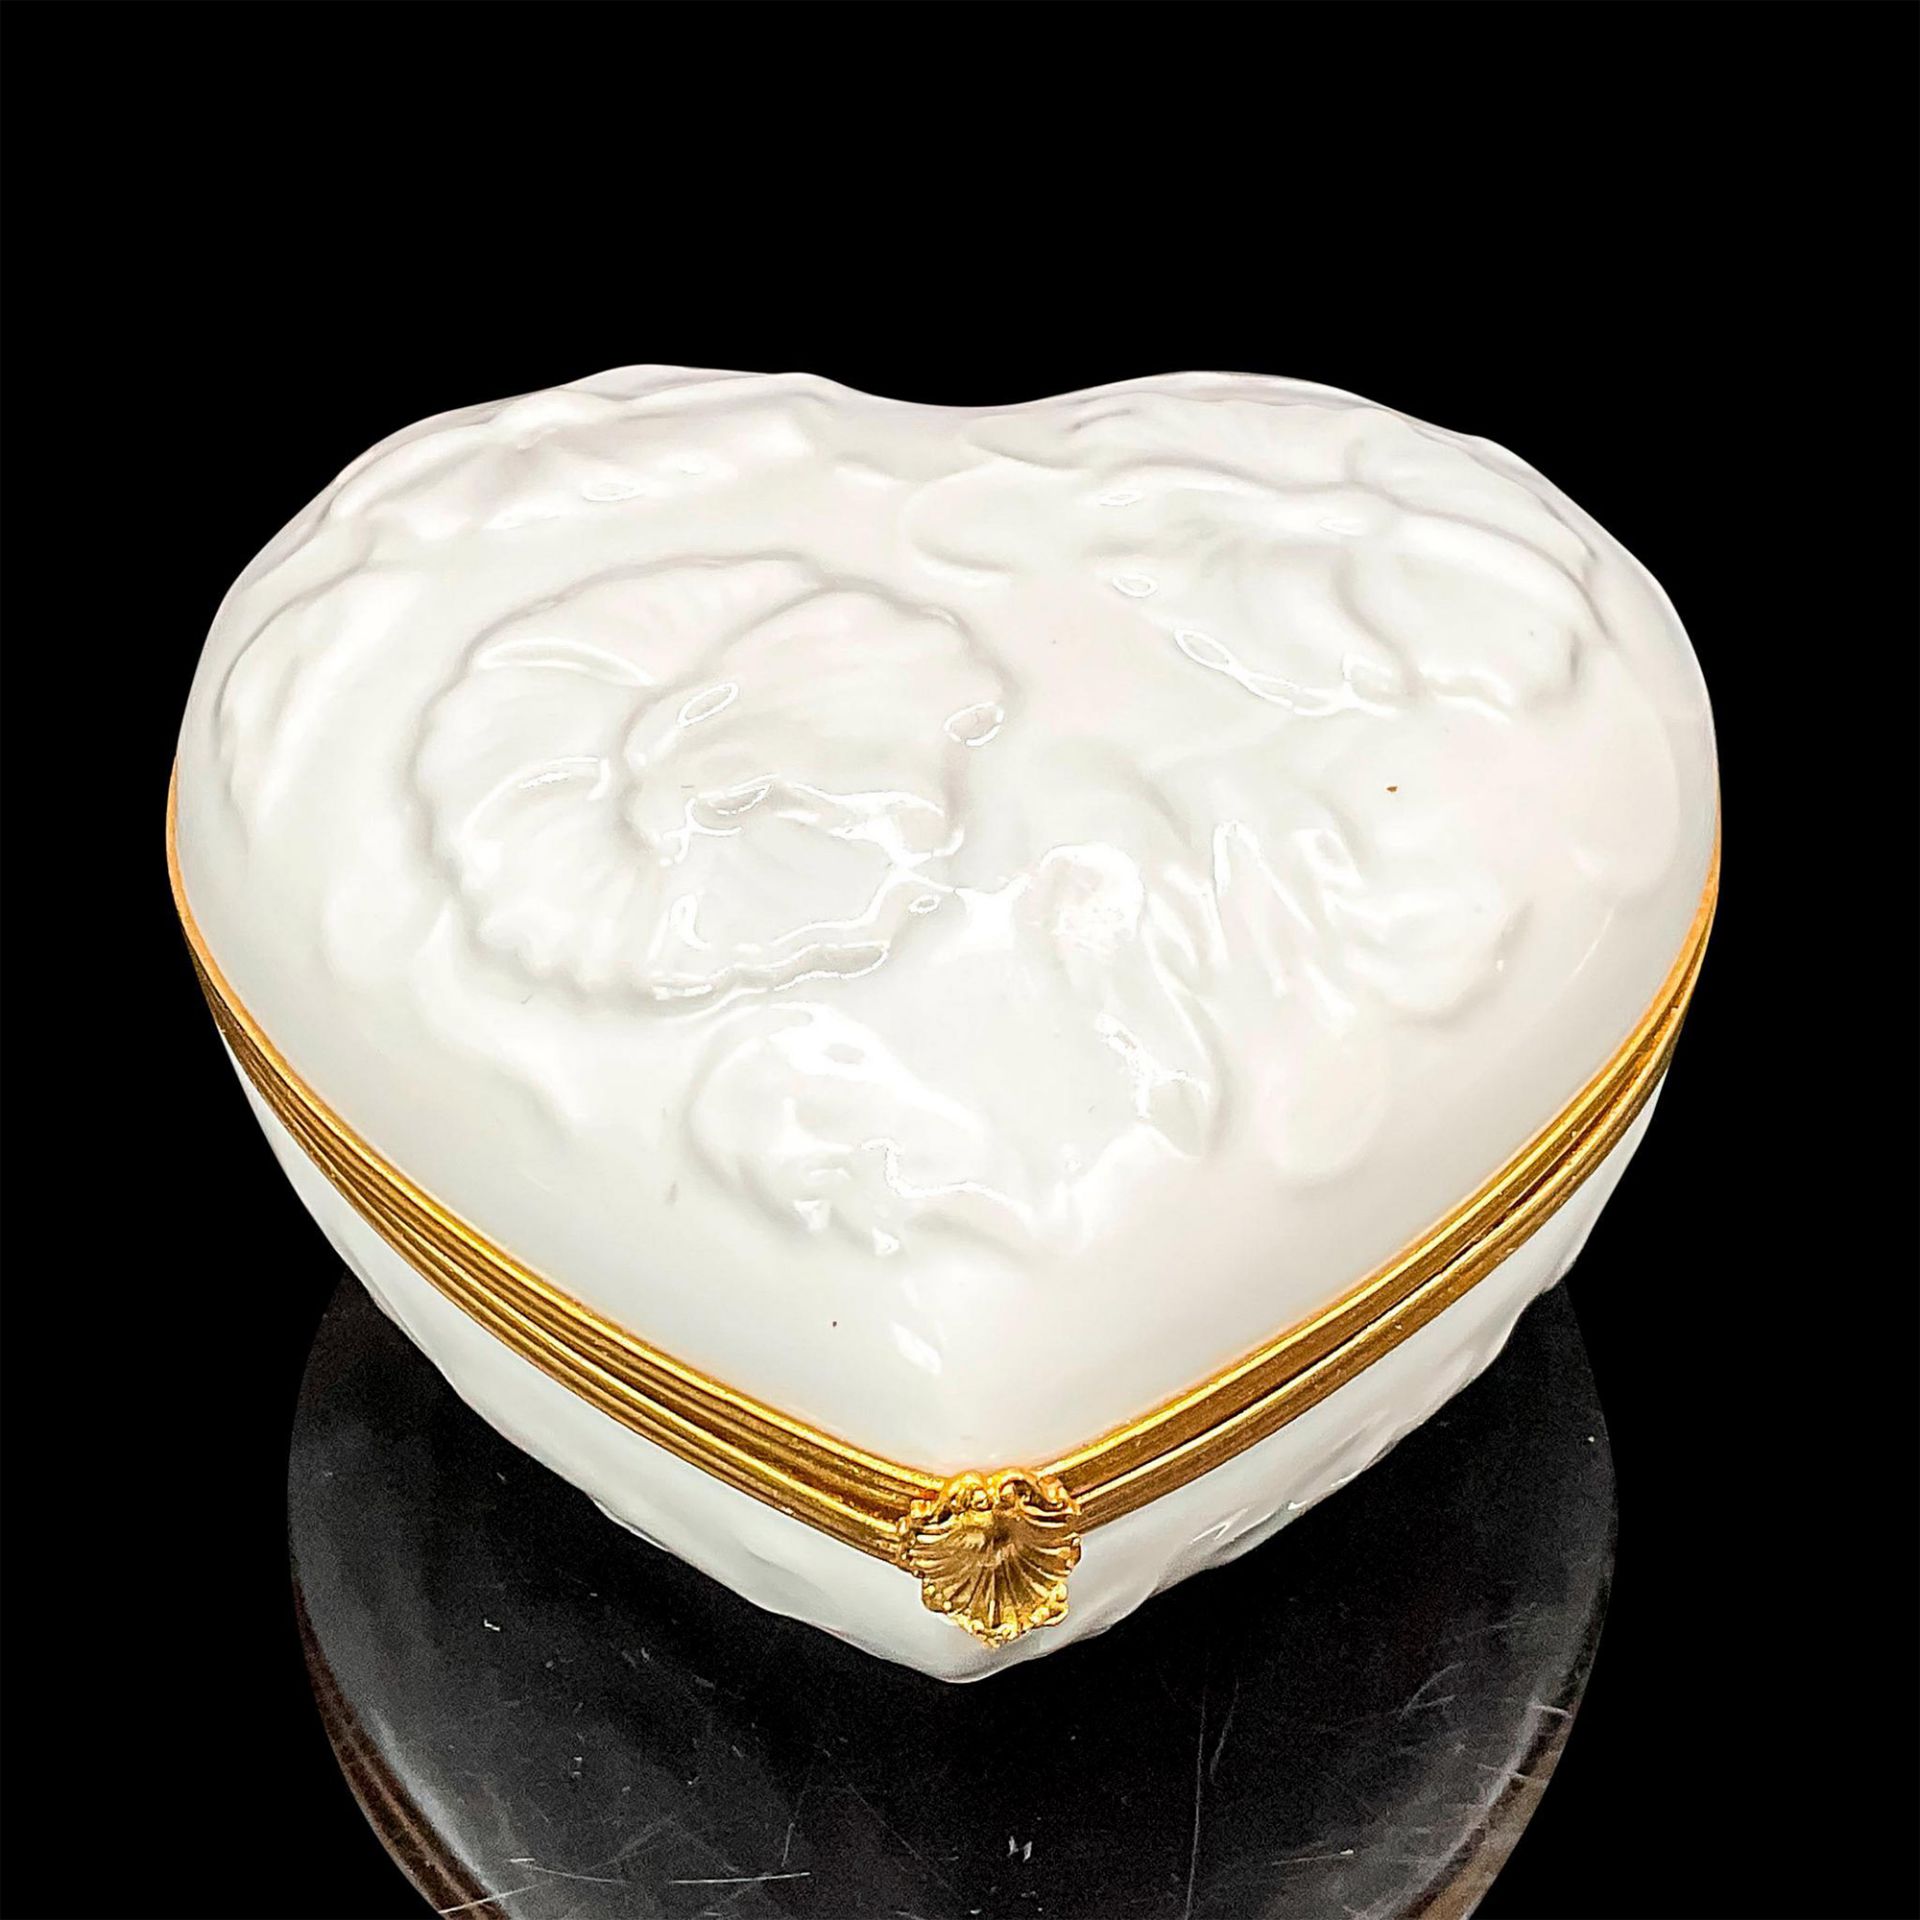 Chamart Limoges Porcelain Heart Box, White and Gold